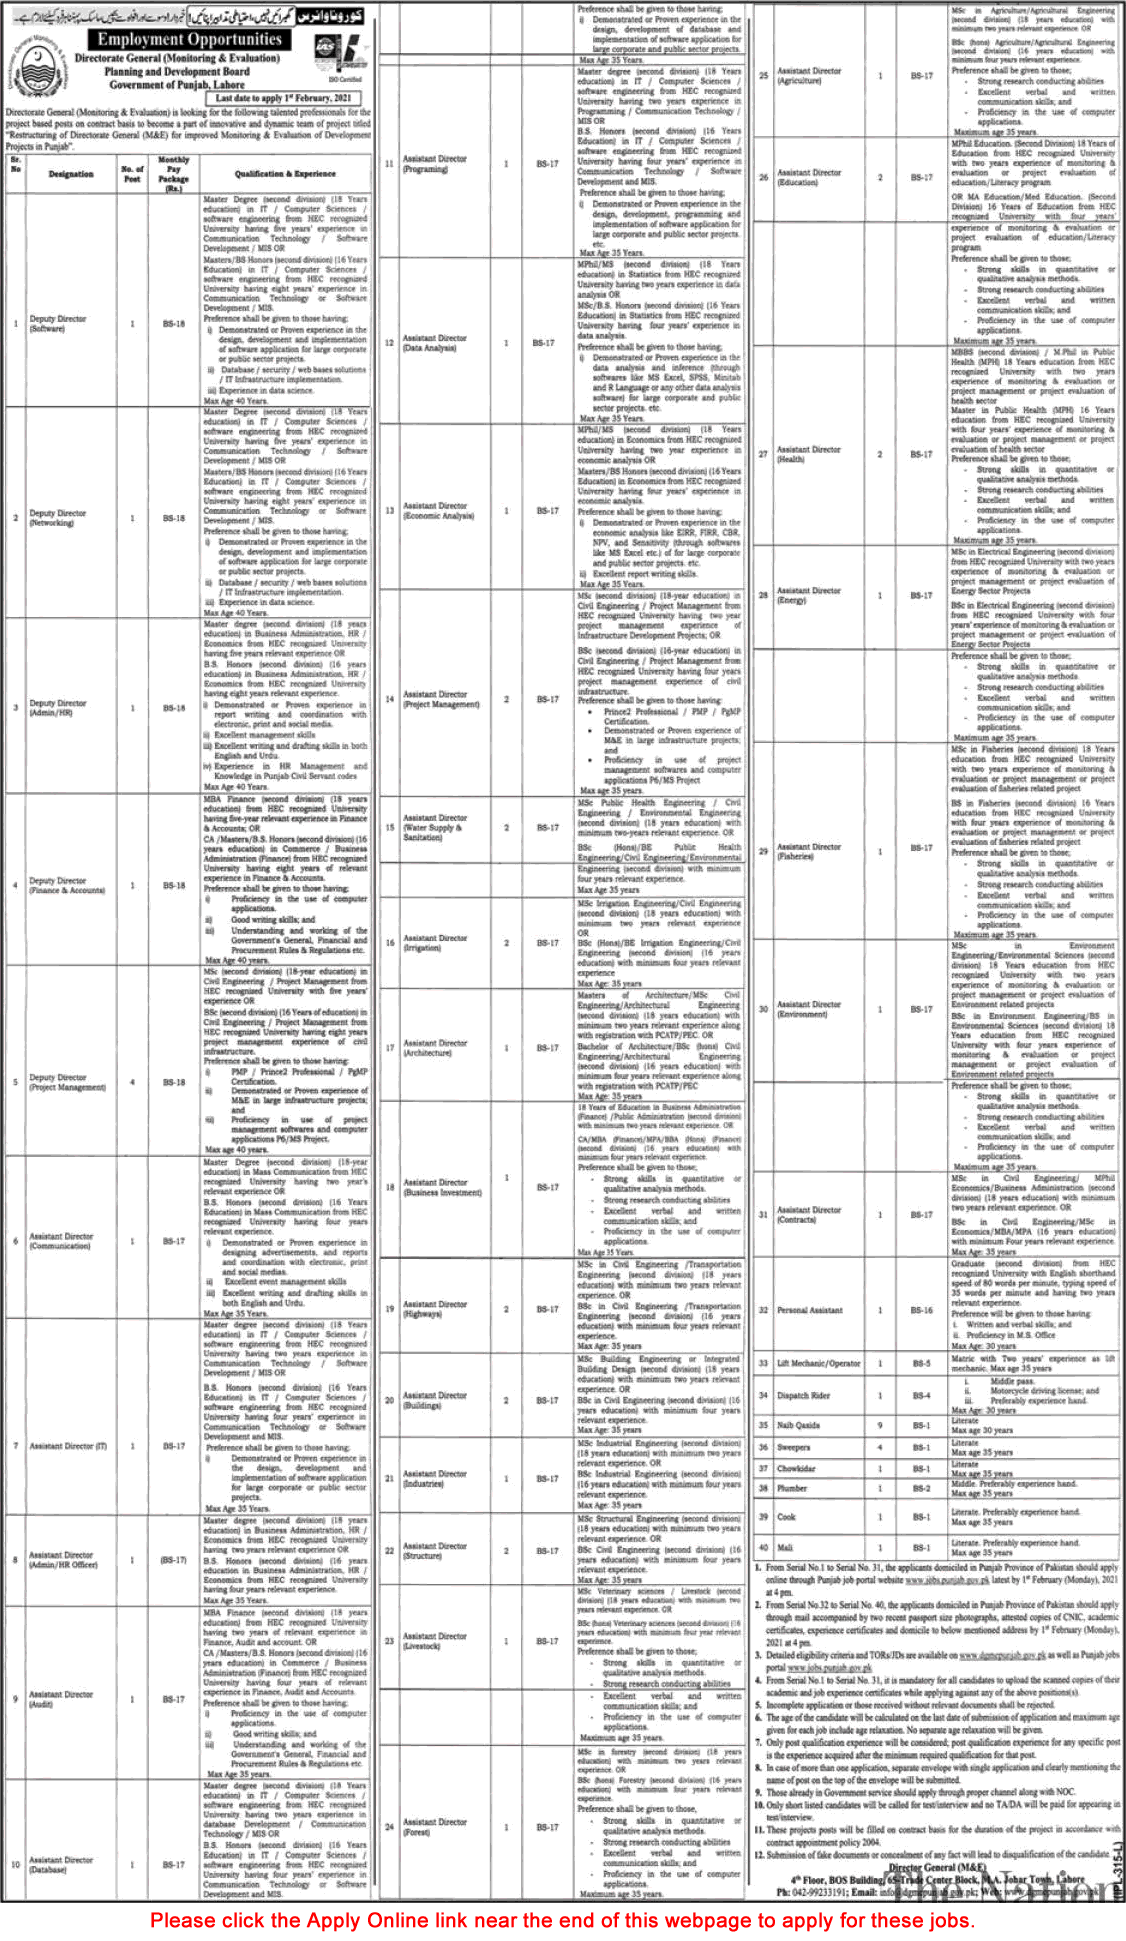 Planning and Development Board Punjab Jobs 2021 Apply Online Assistant Directors & Others Latest